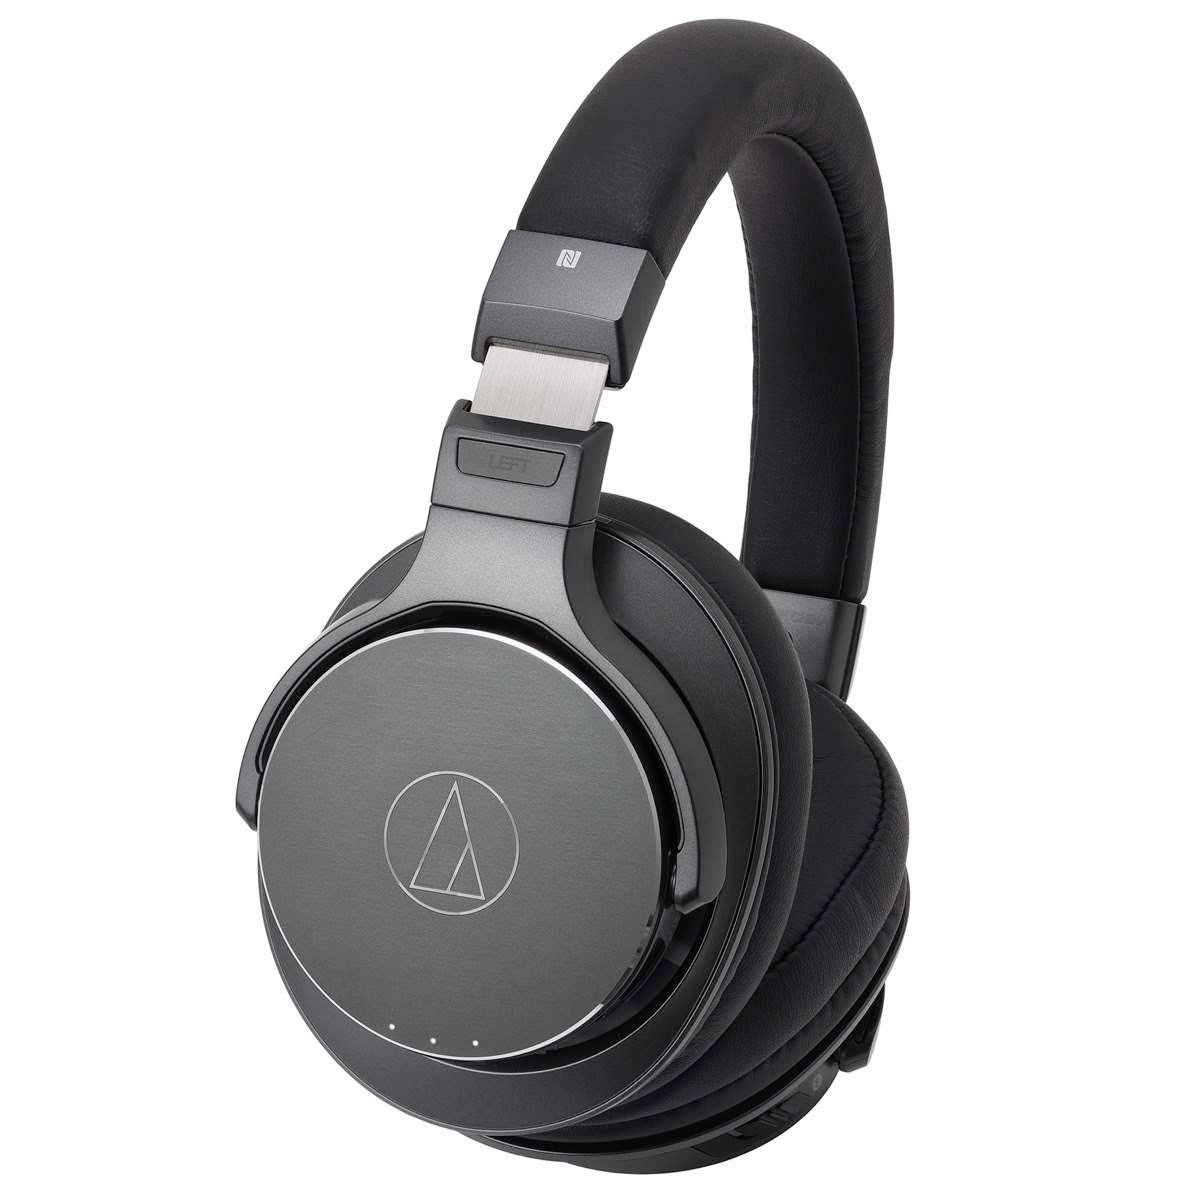 audio-technica ATH-DSR7BT Wireless Over-Ear Headphones with Pure Digital Drive